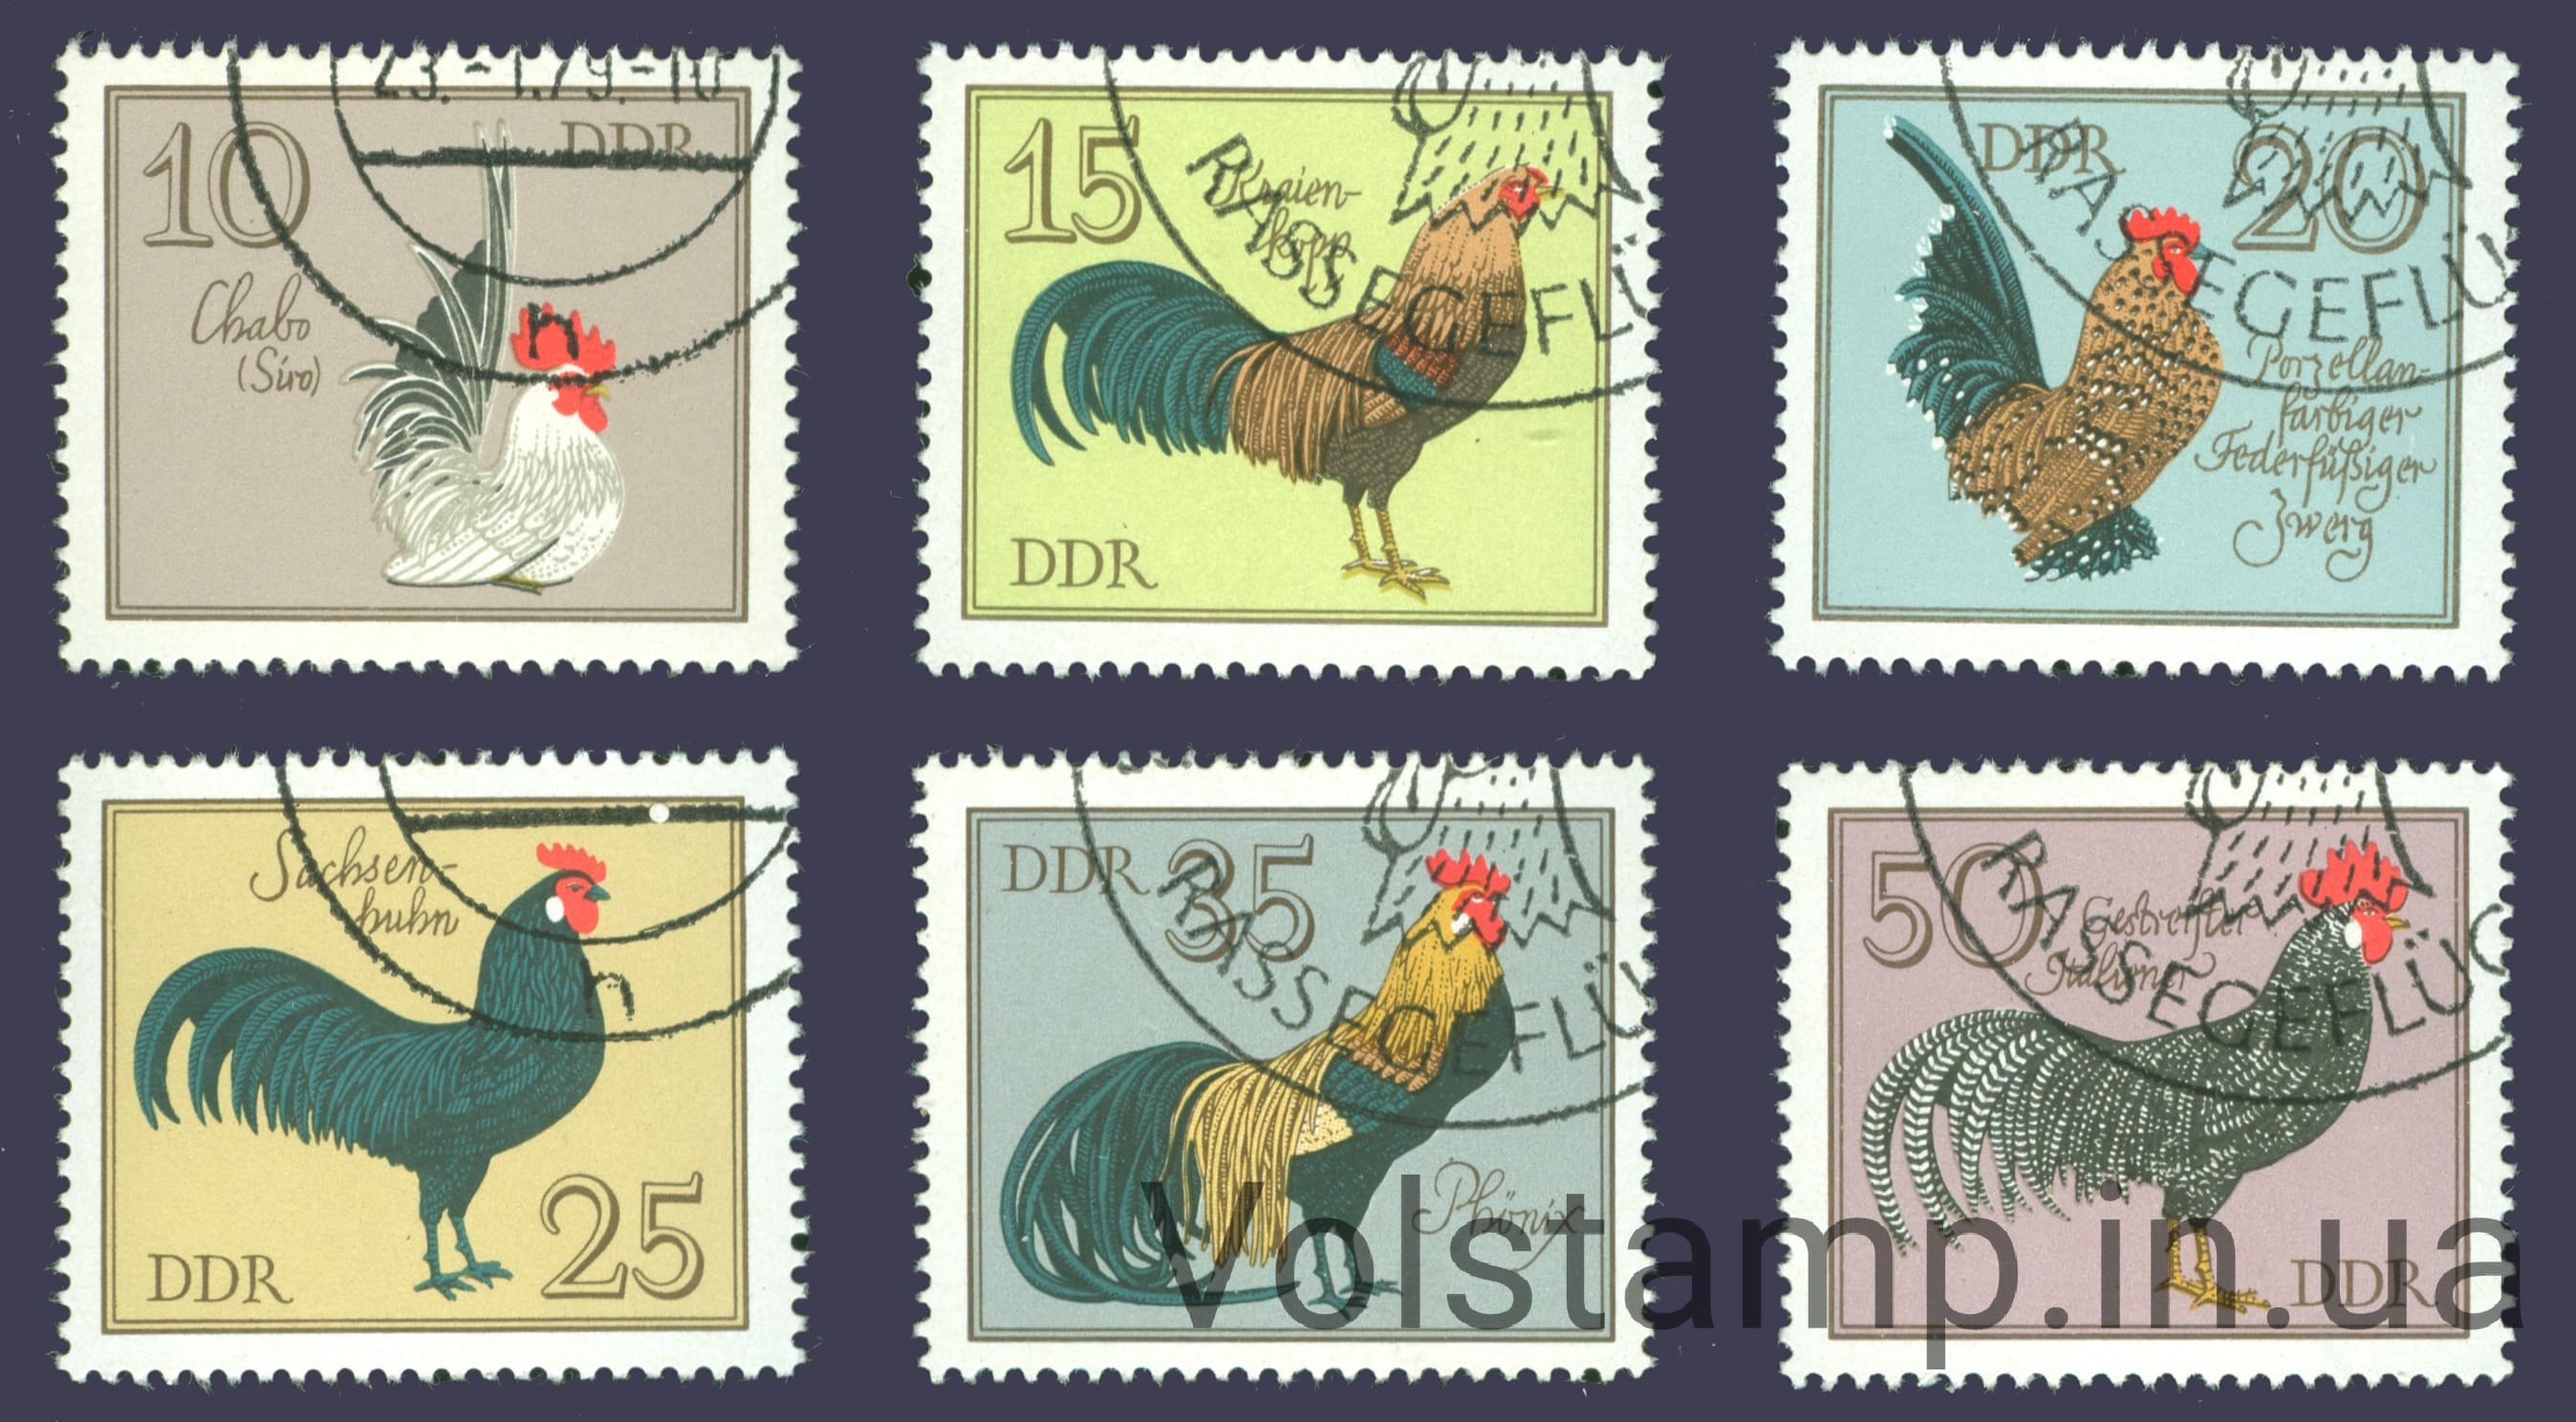 1979 GDR series of stamps (Birds, Roosters) Used №2394-2399